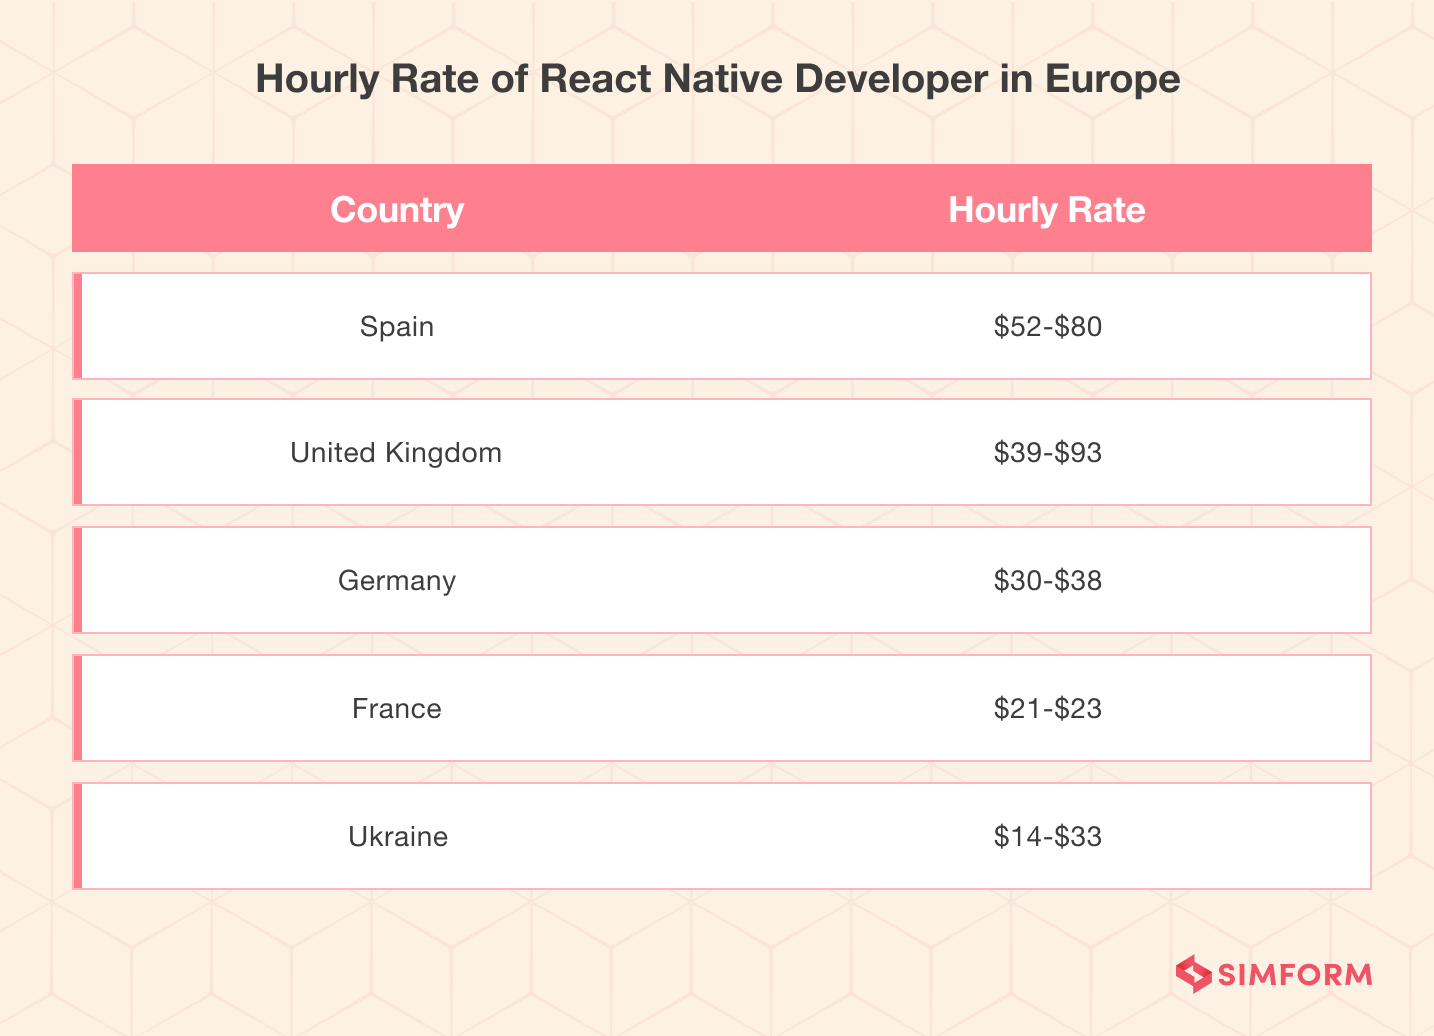 Hourly-Rate-of-React-Native-Developers-in-Europe